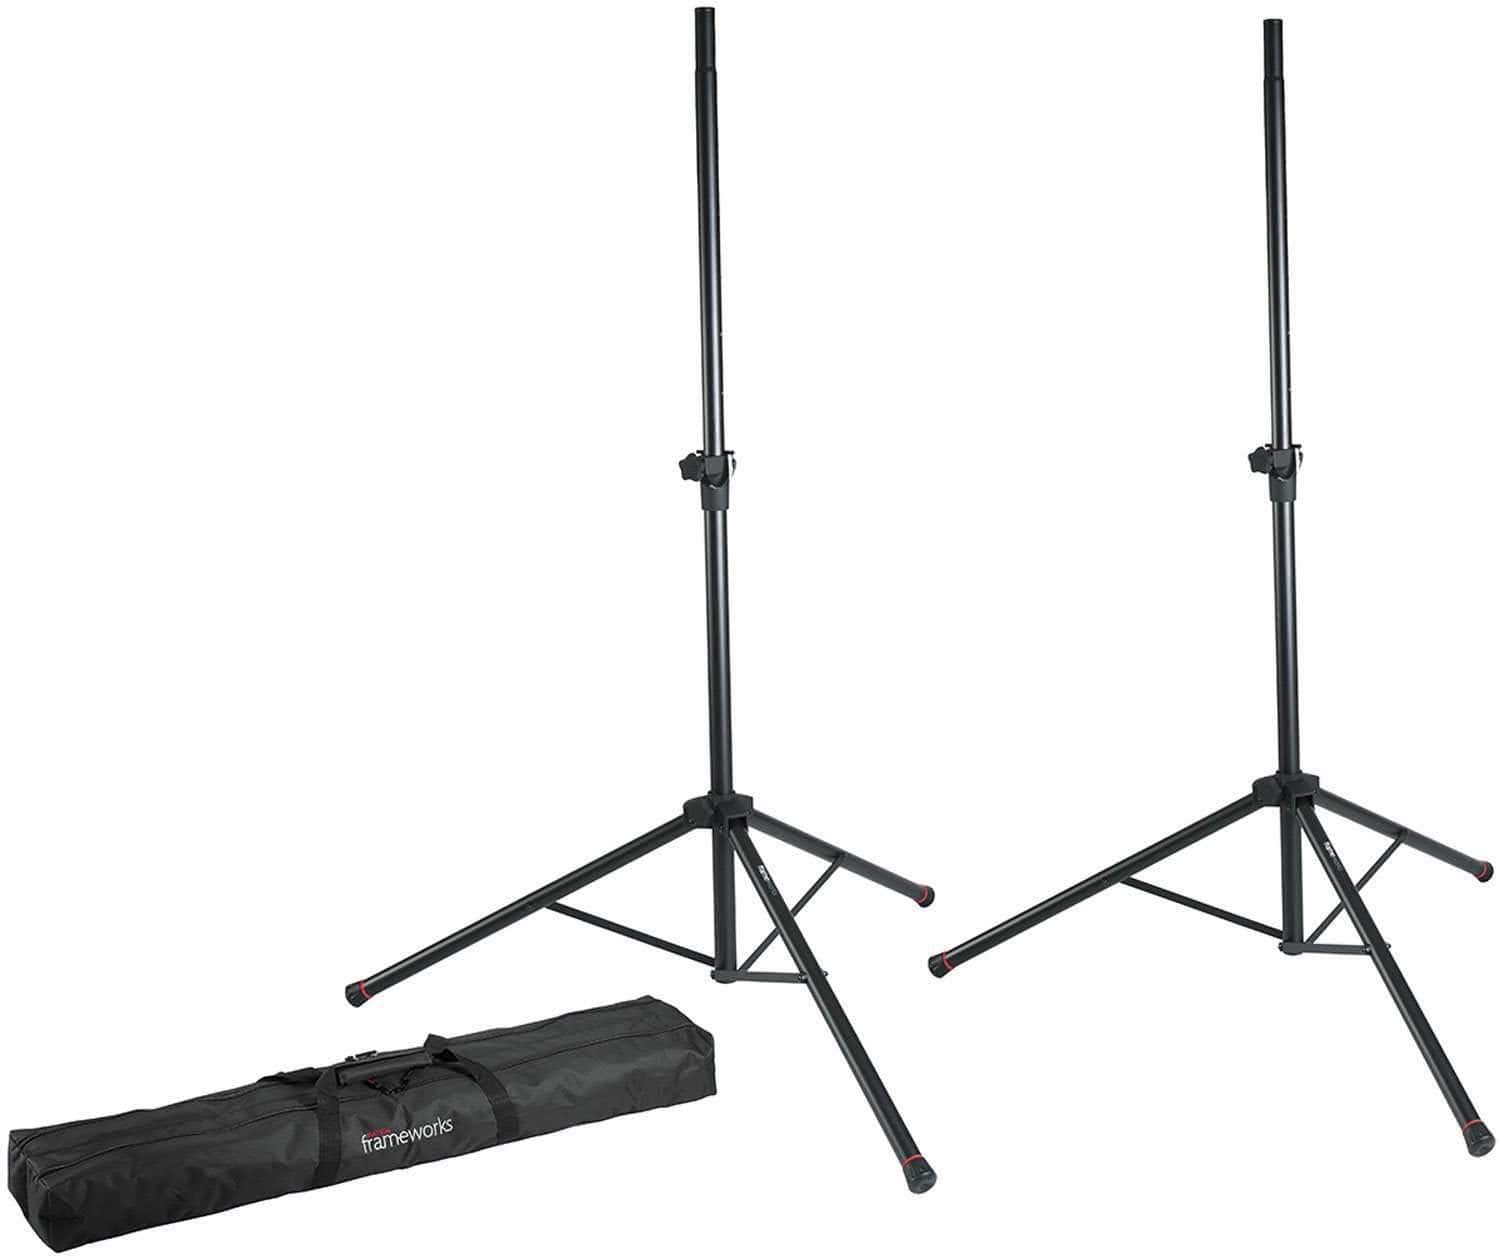 Mackie SRM350V3 10-Inch Powered Speakers (2) with Gator Stands - PSSL ProSound and Stage Lighting